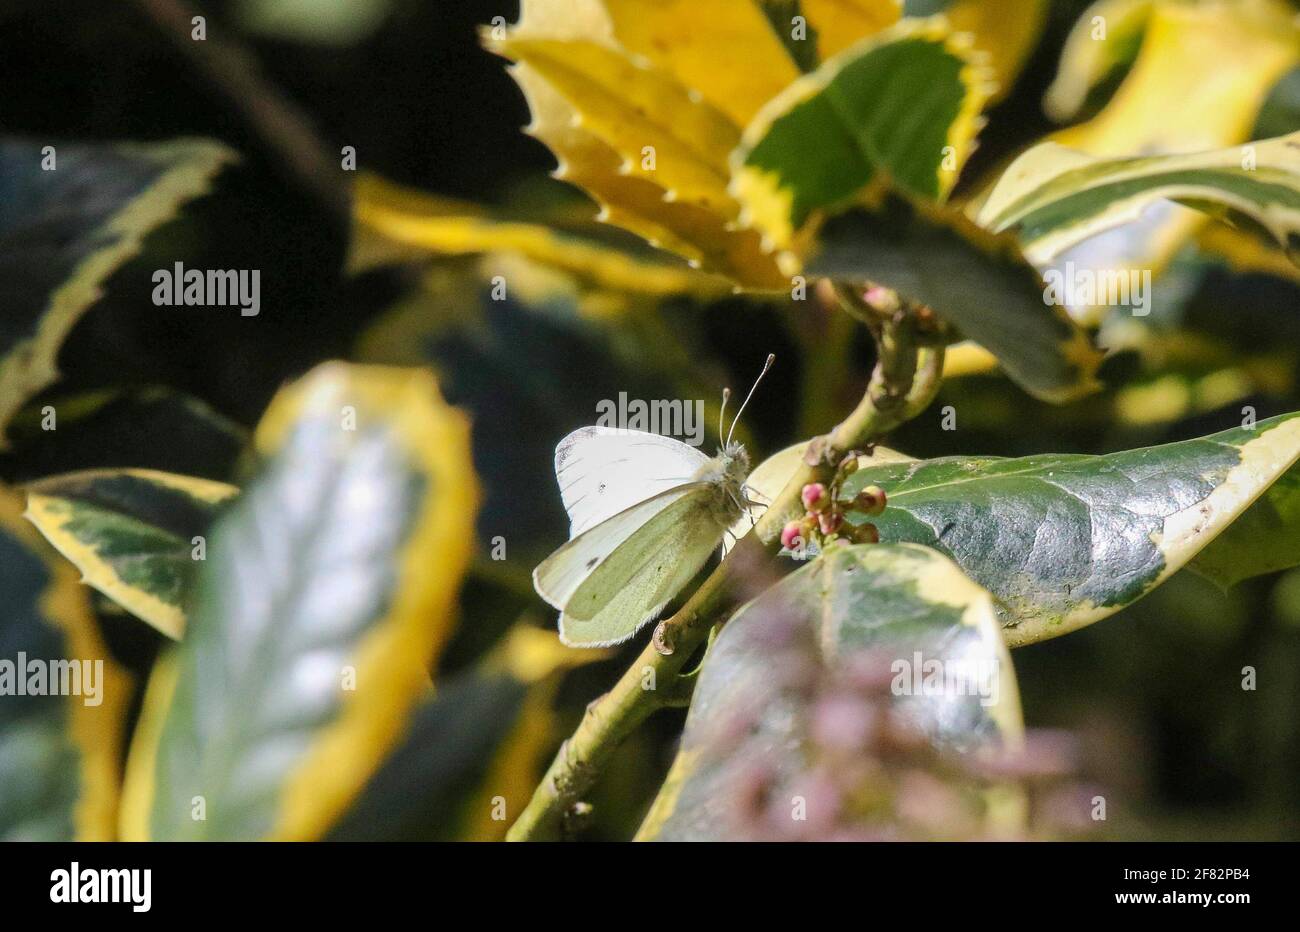 Magheralin, County Armagh, Northern Ireland, UK. 11 April 2021. UK weather – some sunny spells but cool with a cold northerly wind. A small white butterfly flits about garden shrubs and rests to asorb the suns rays out of that cool breeze. Credit: CAZIMB/Alamy Live News. Stock Photo